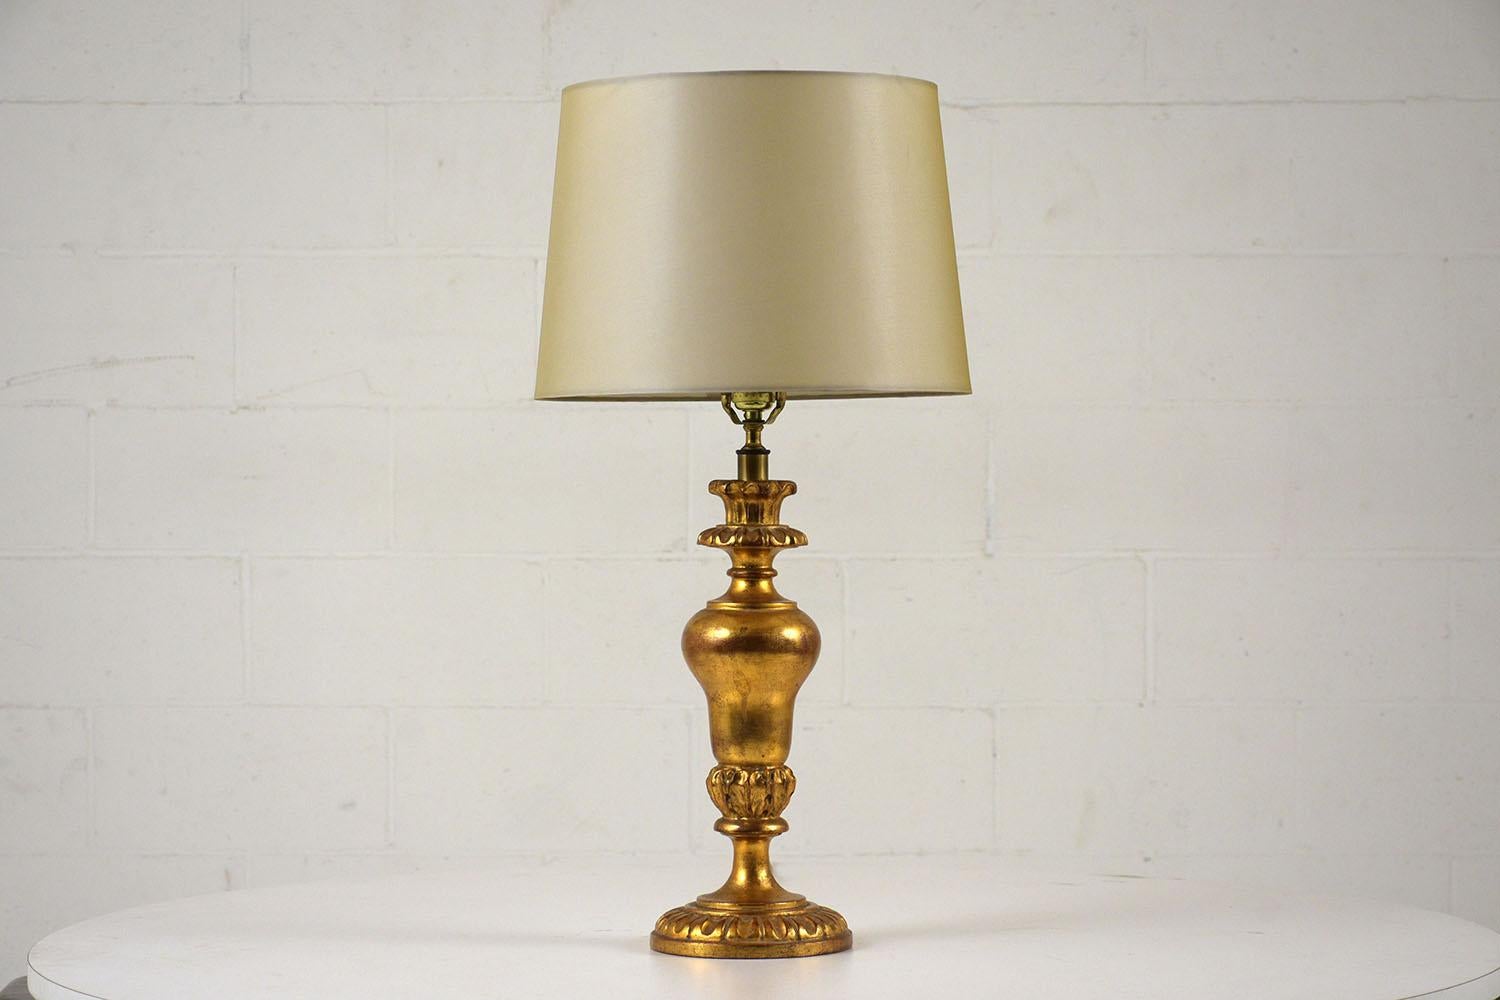 This 1970s Italian Louis XVI-style table lamp features a carved giltwood base with acanthus leaves and egg and dart accents. The lamp is accompanied by a sand color shade in a rayon fabric. This lamp is wired to US standards and is in working